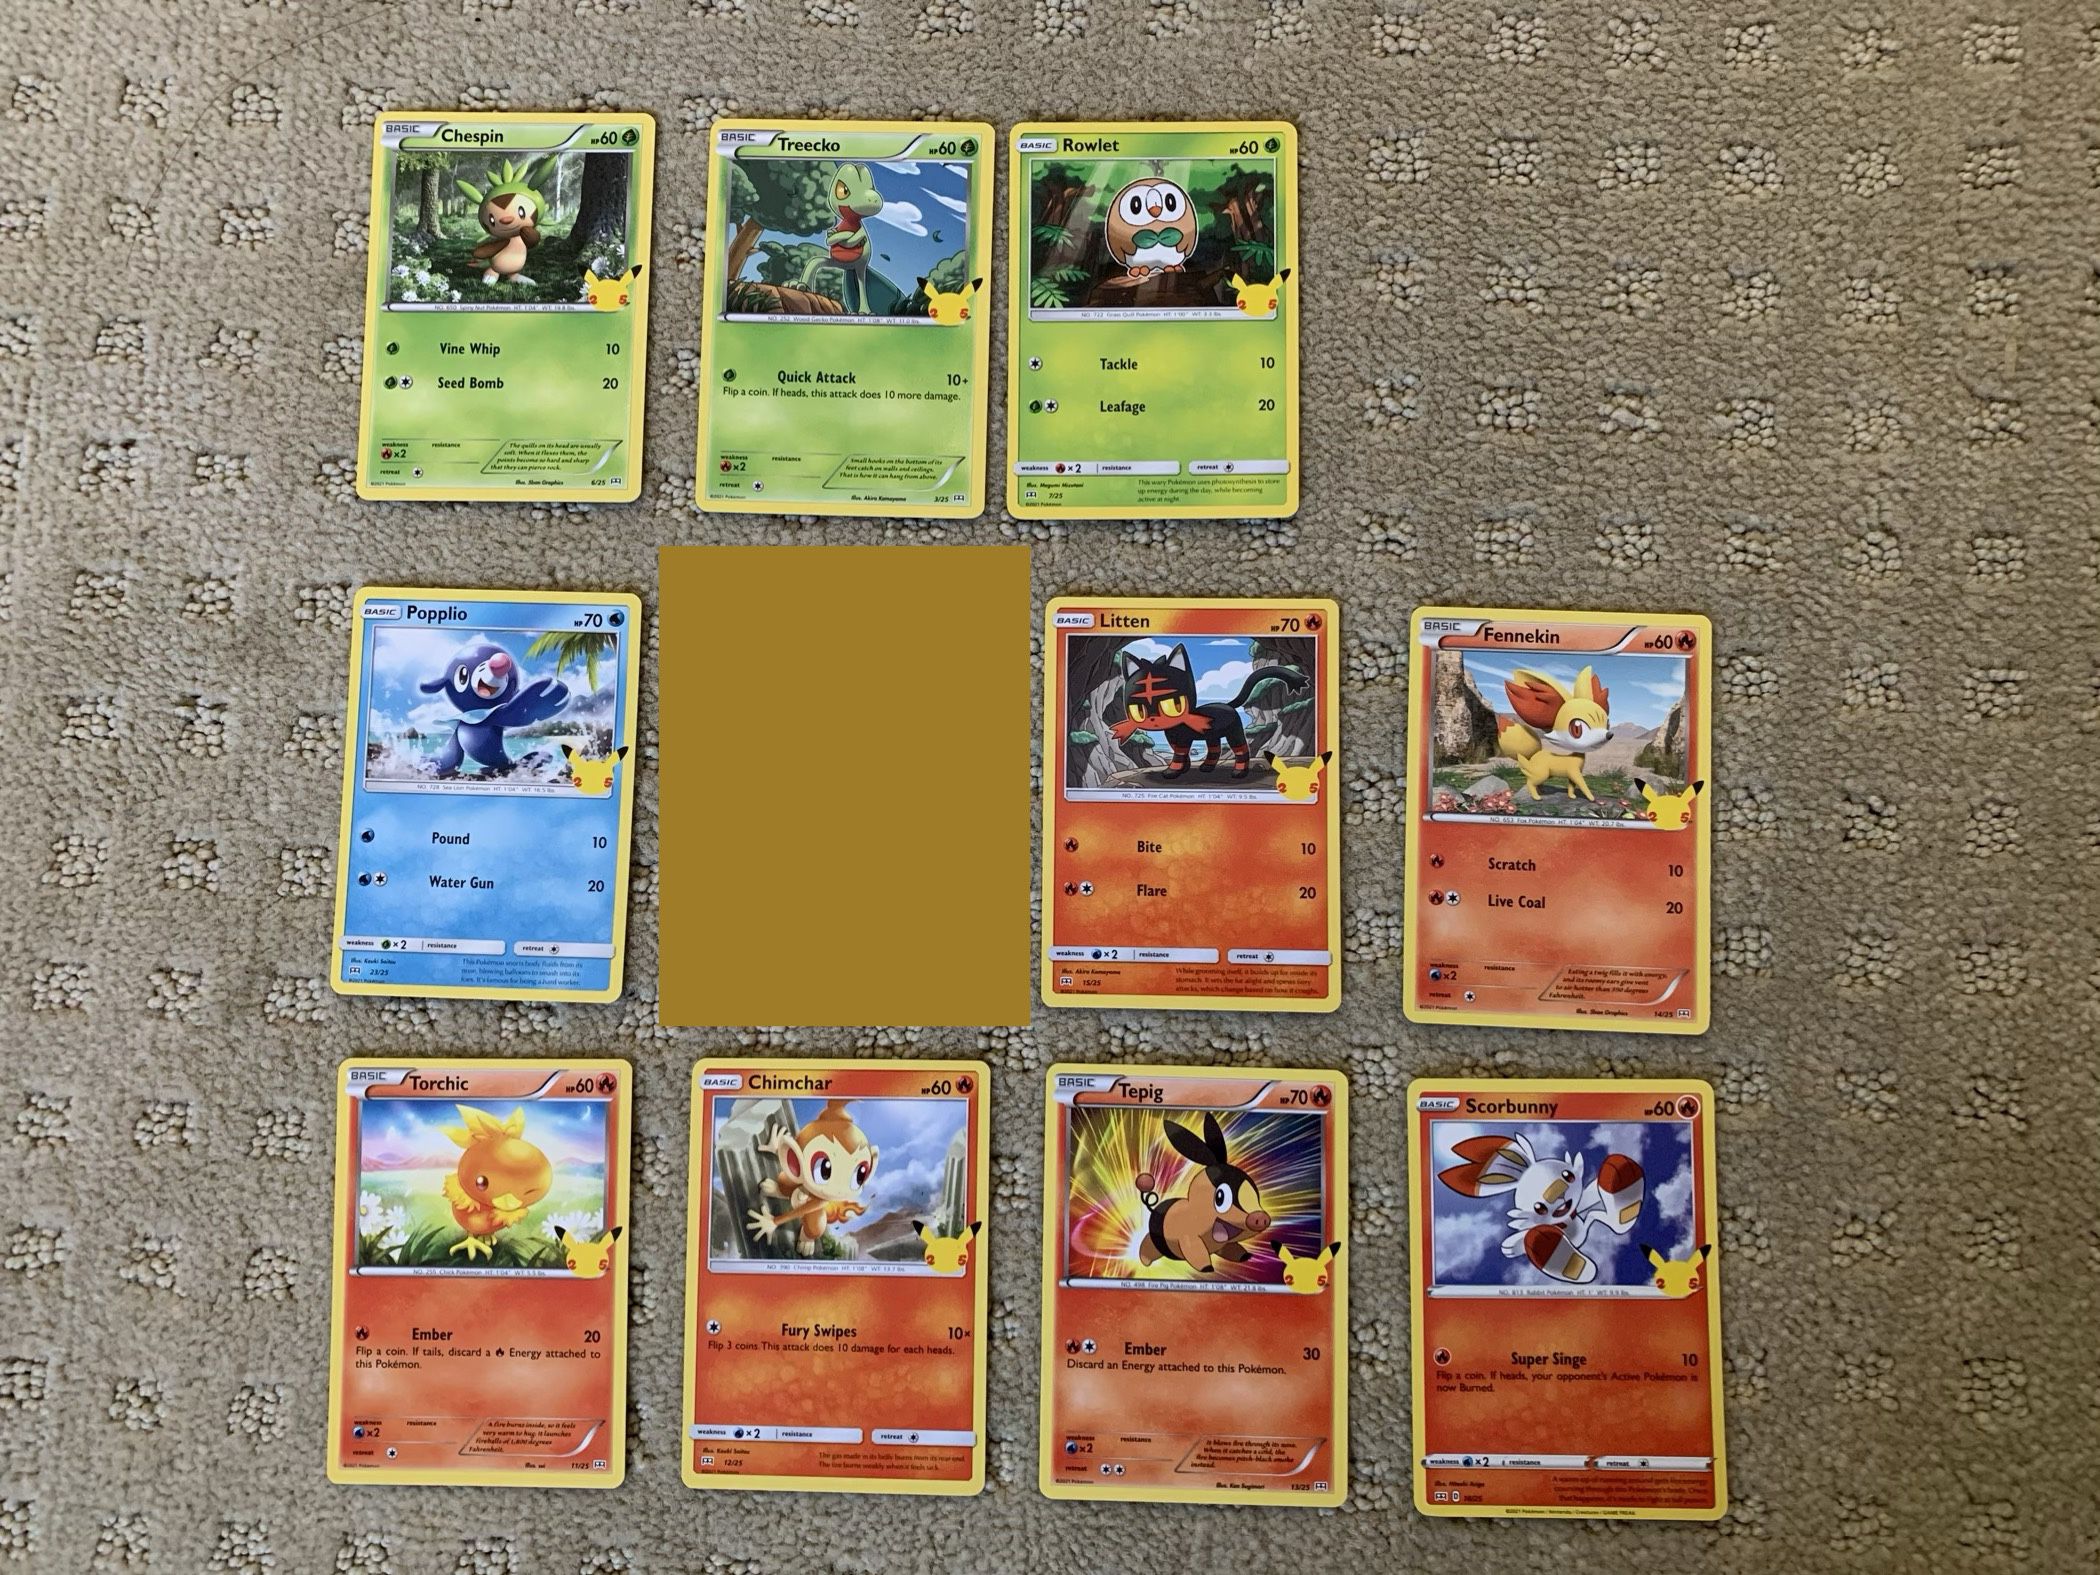 McDonalds x Pokemon - Lot Of 10 Commons Cards - Mint Condition!